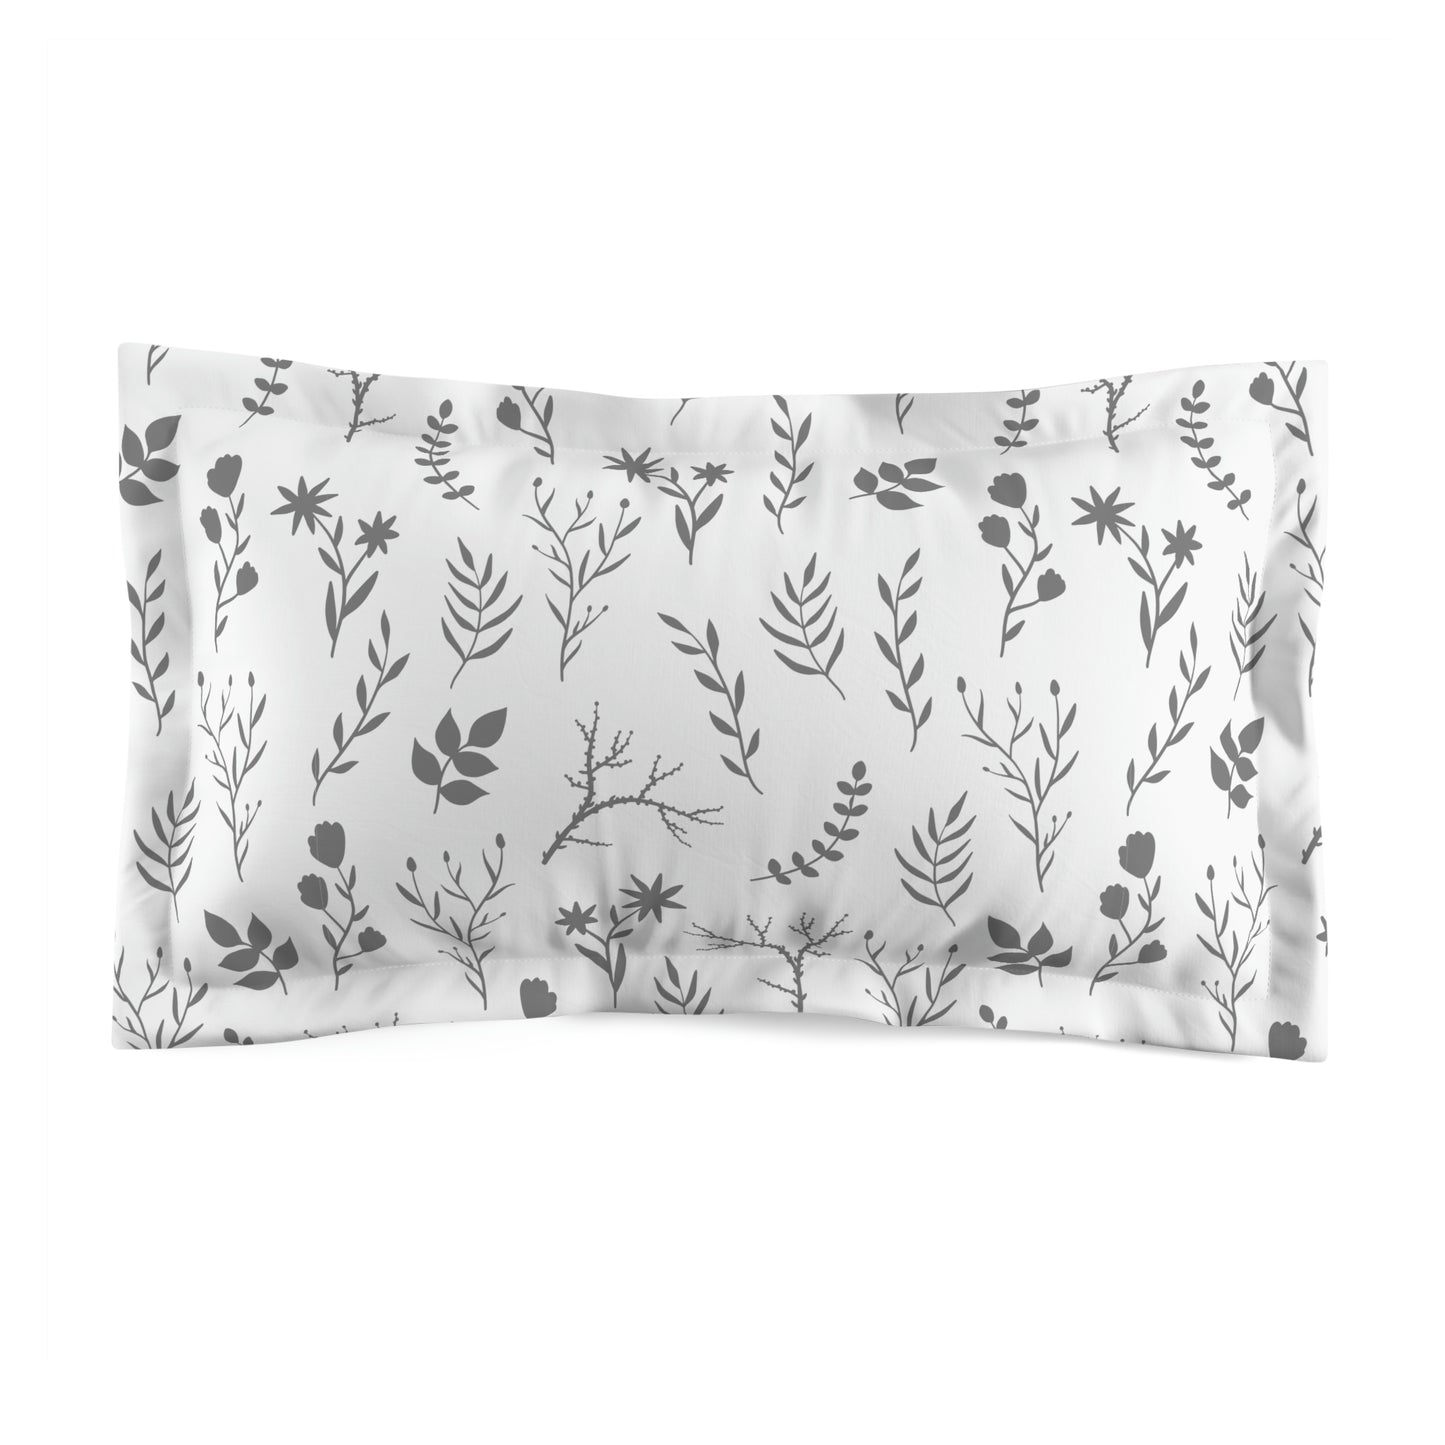 Grey and White Luxurious Floral Microfiber Pillow Sham